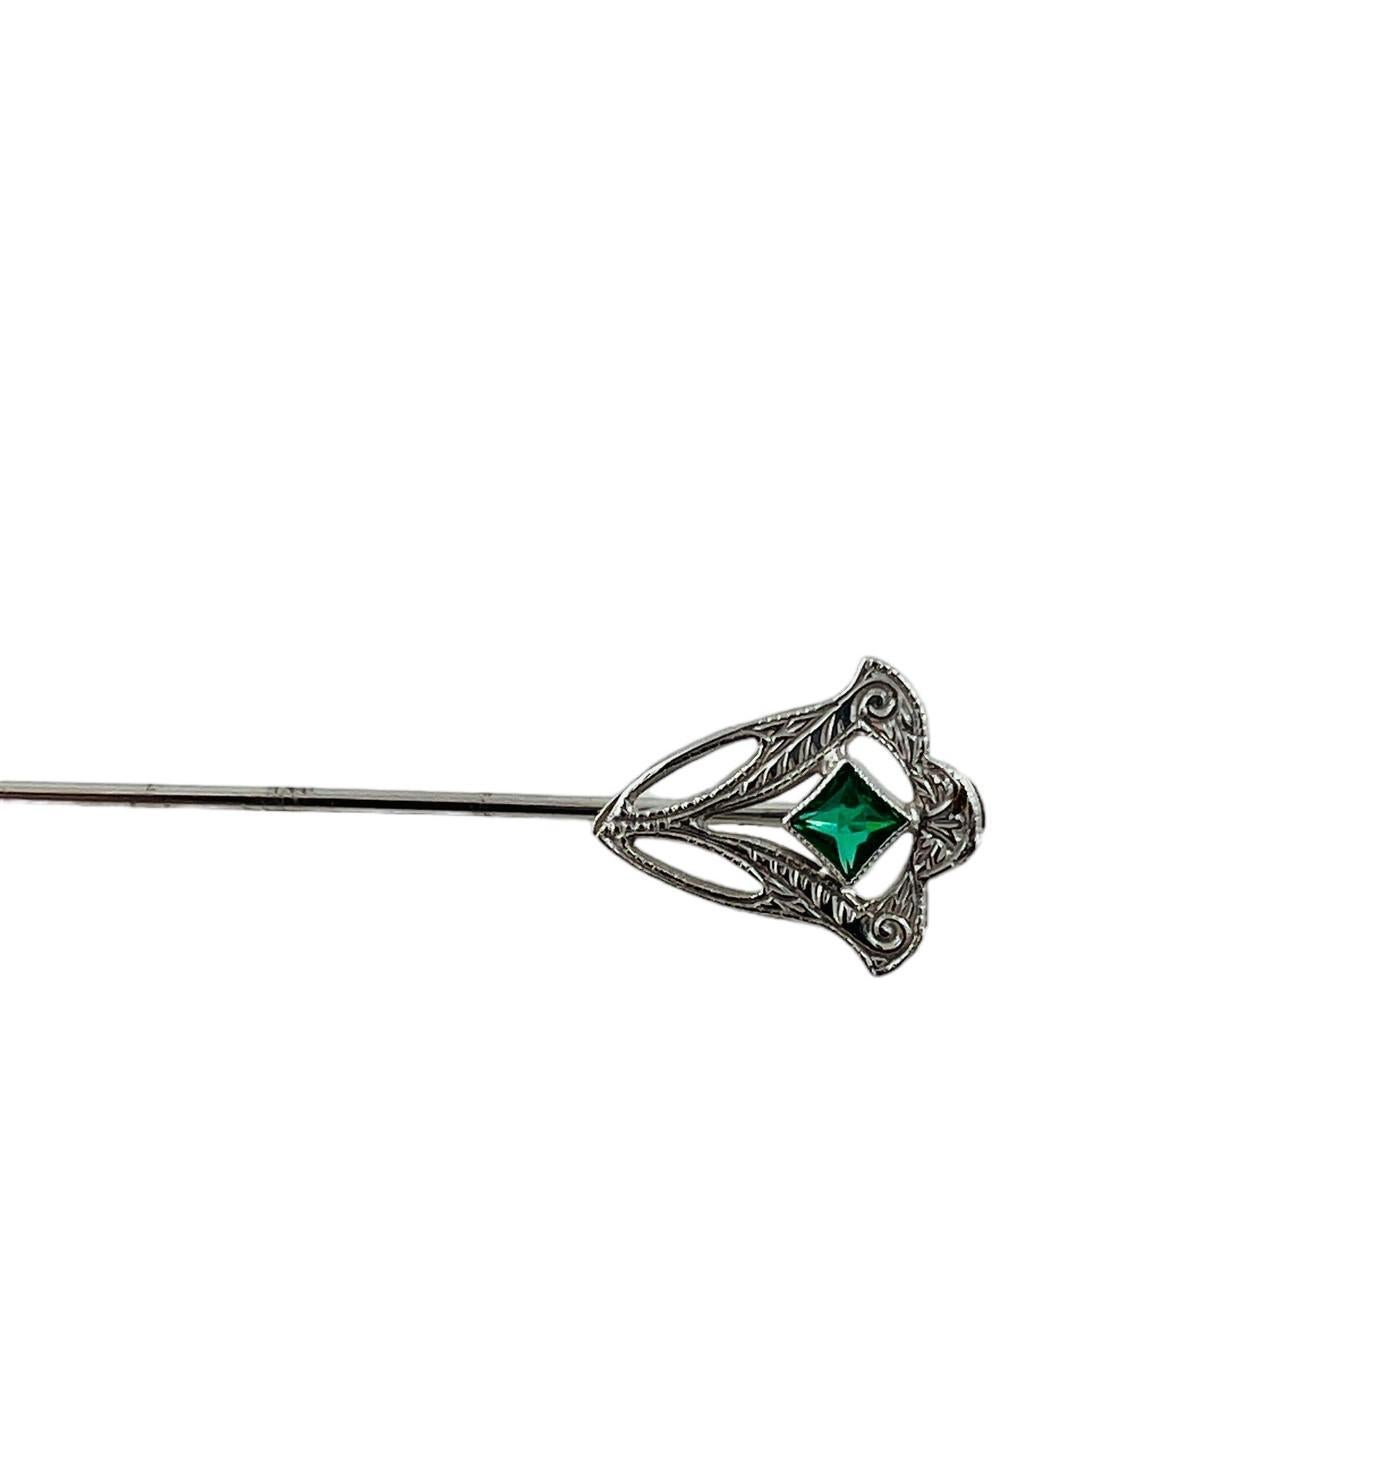 10K White Gold Stick Pin with Green Glass Stone

This beautiful stick pin is set in white gold

Approx. 2.5